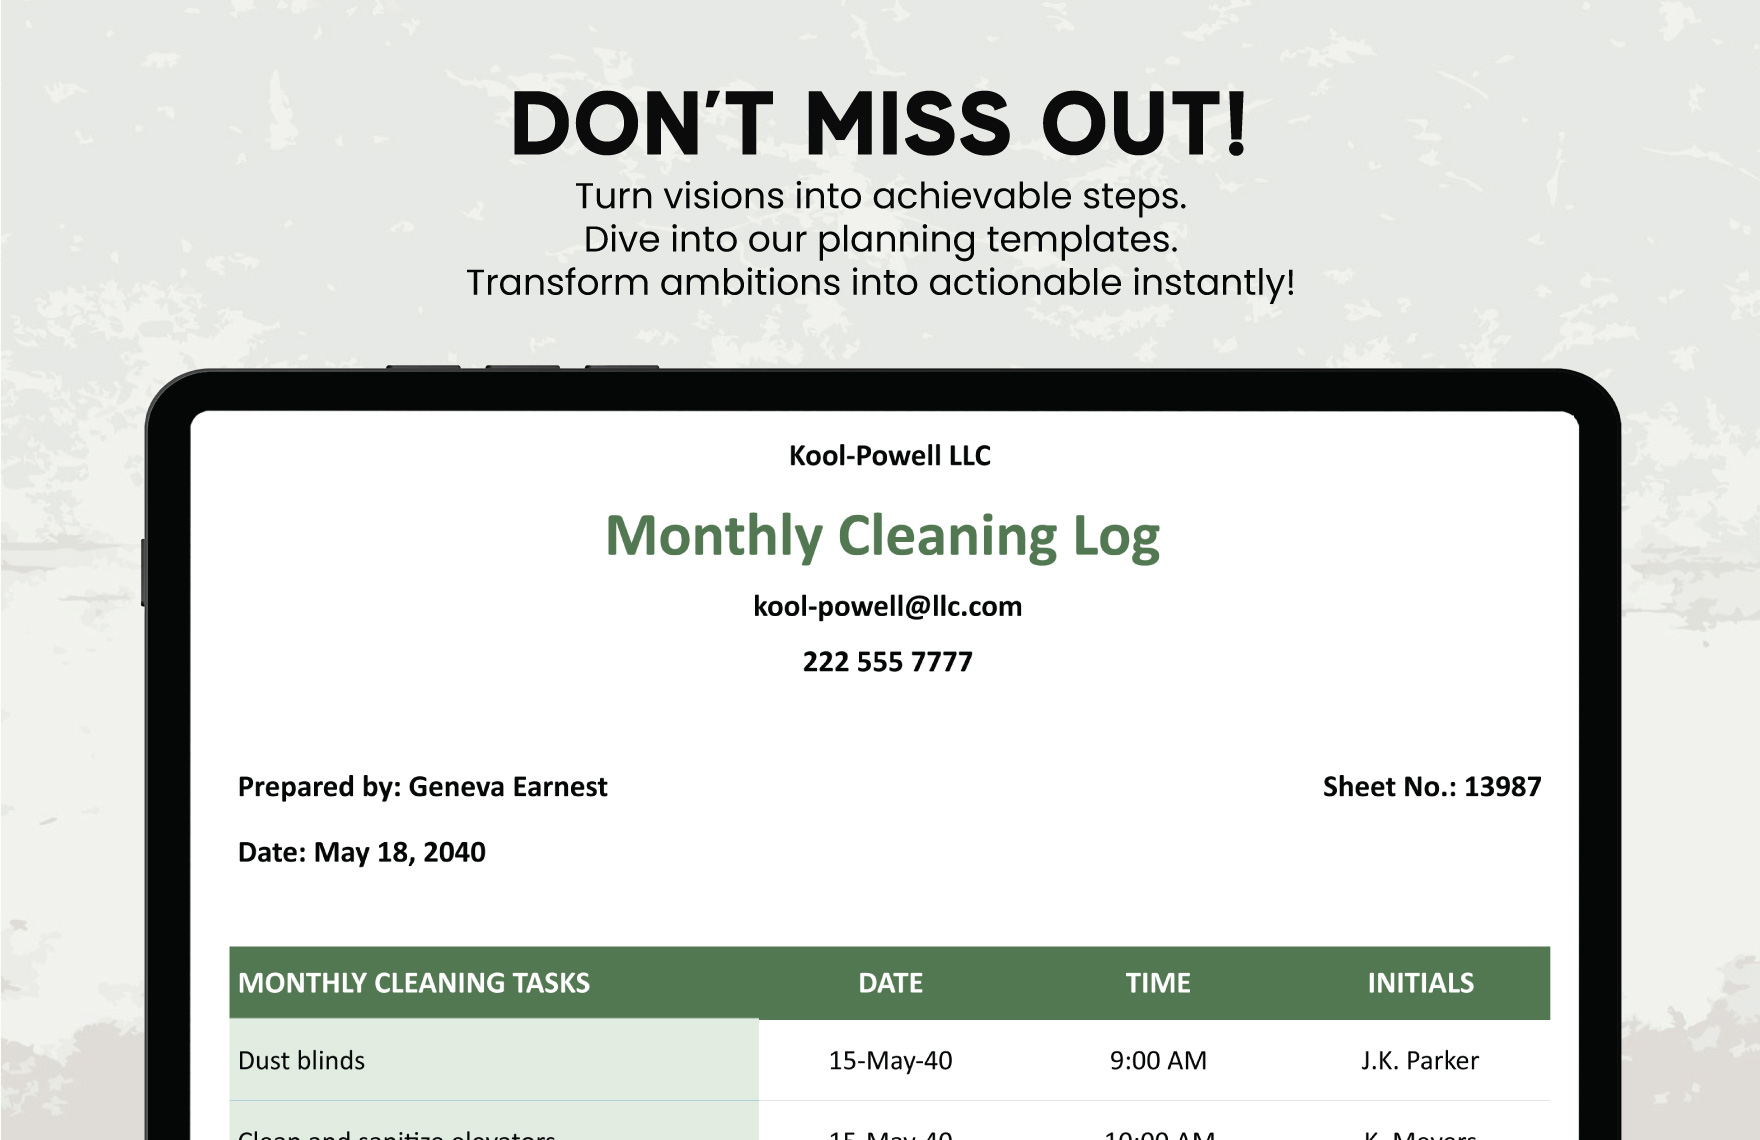 Monthly Cleaning Log Template